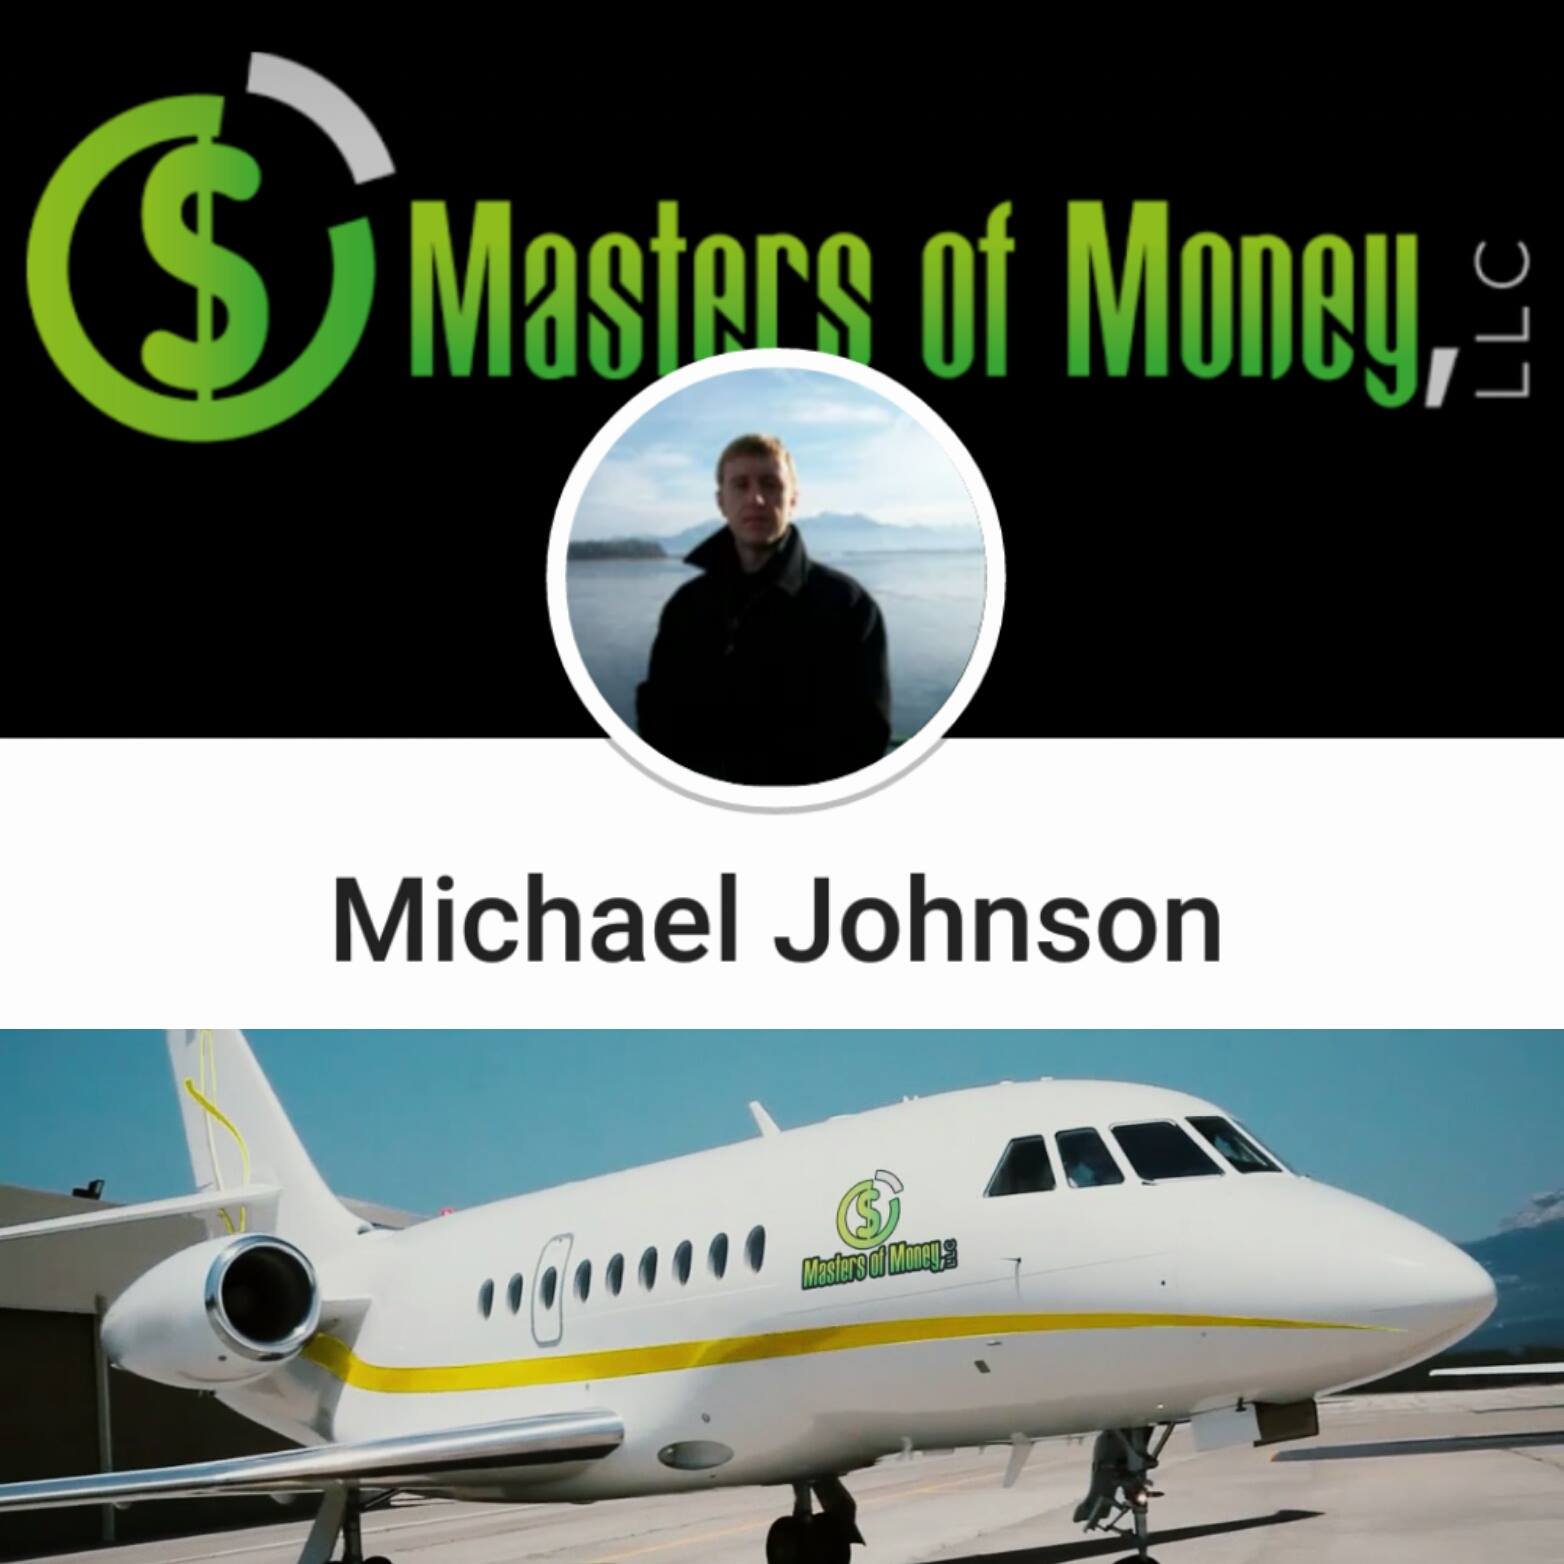 "Something isn’t stupid if it is working.” Michael Johnson - Founder & Owner - Masters of Money, LLC.